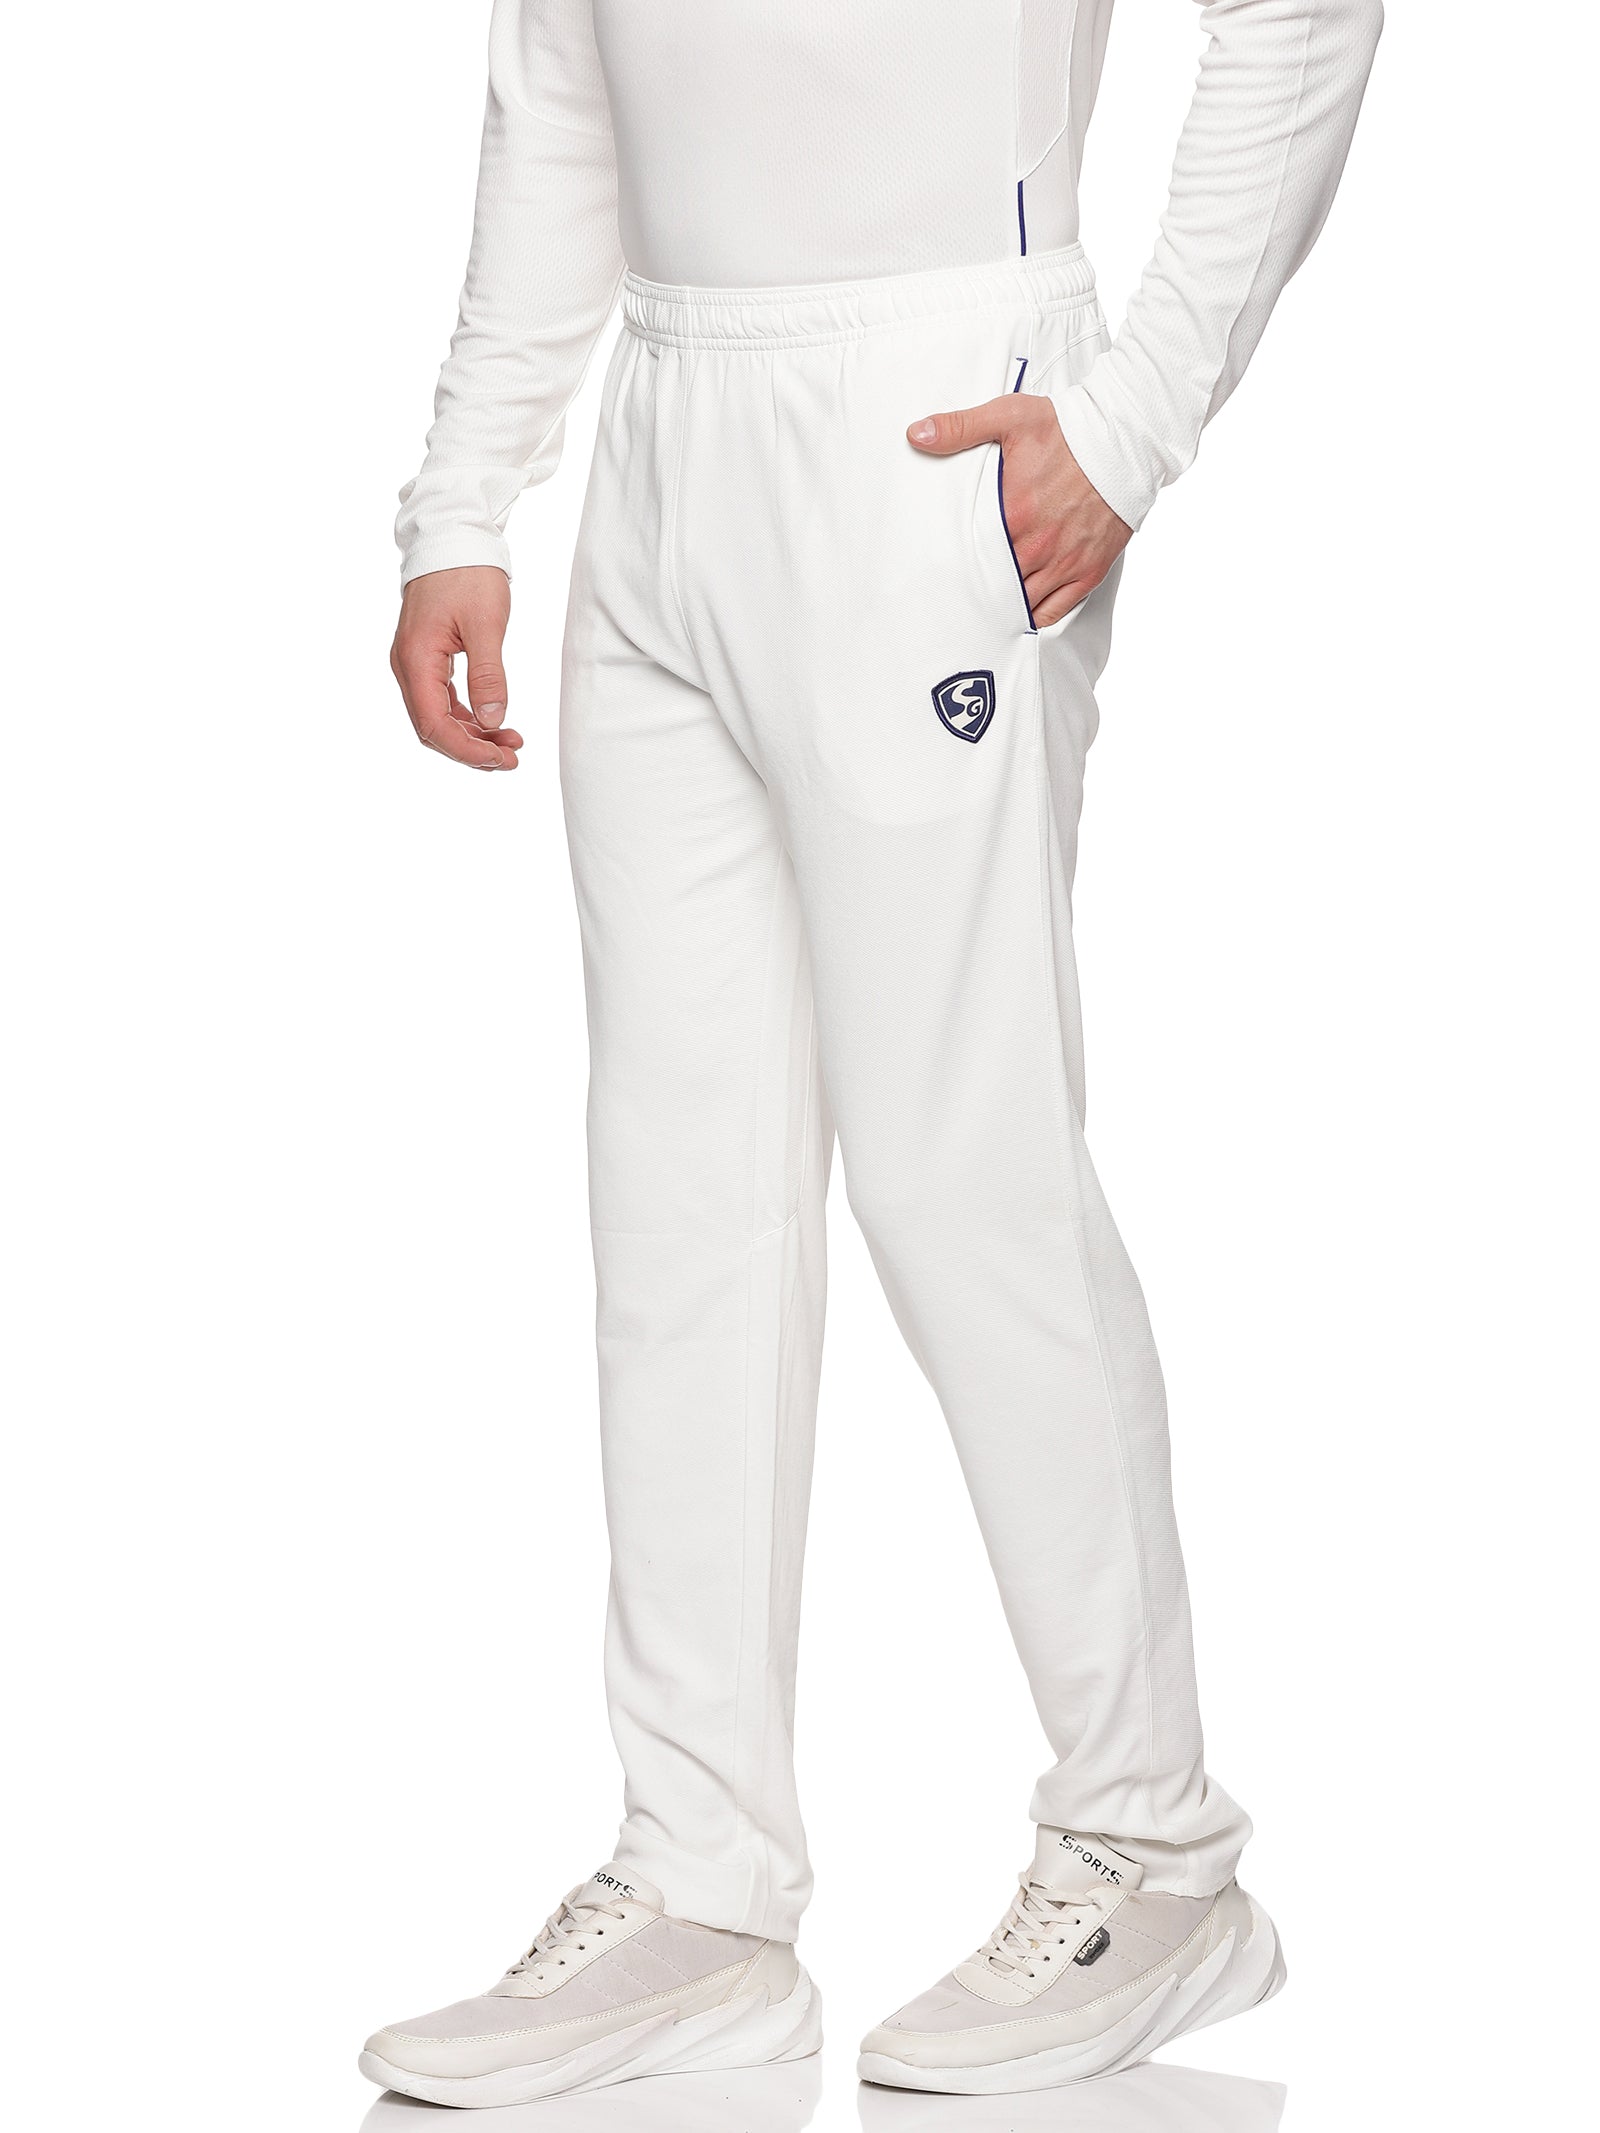 CRICKET TROUSERS  TeamSG